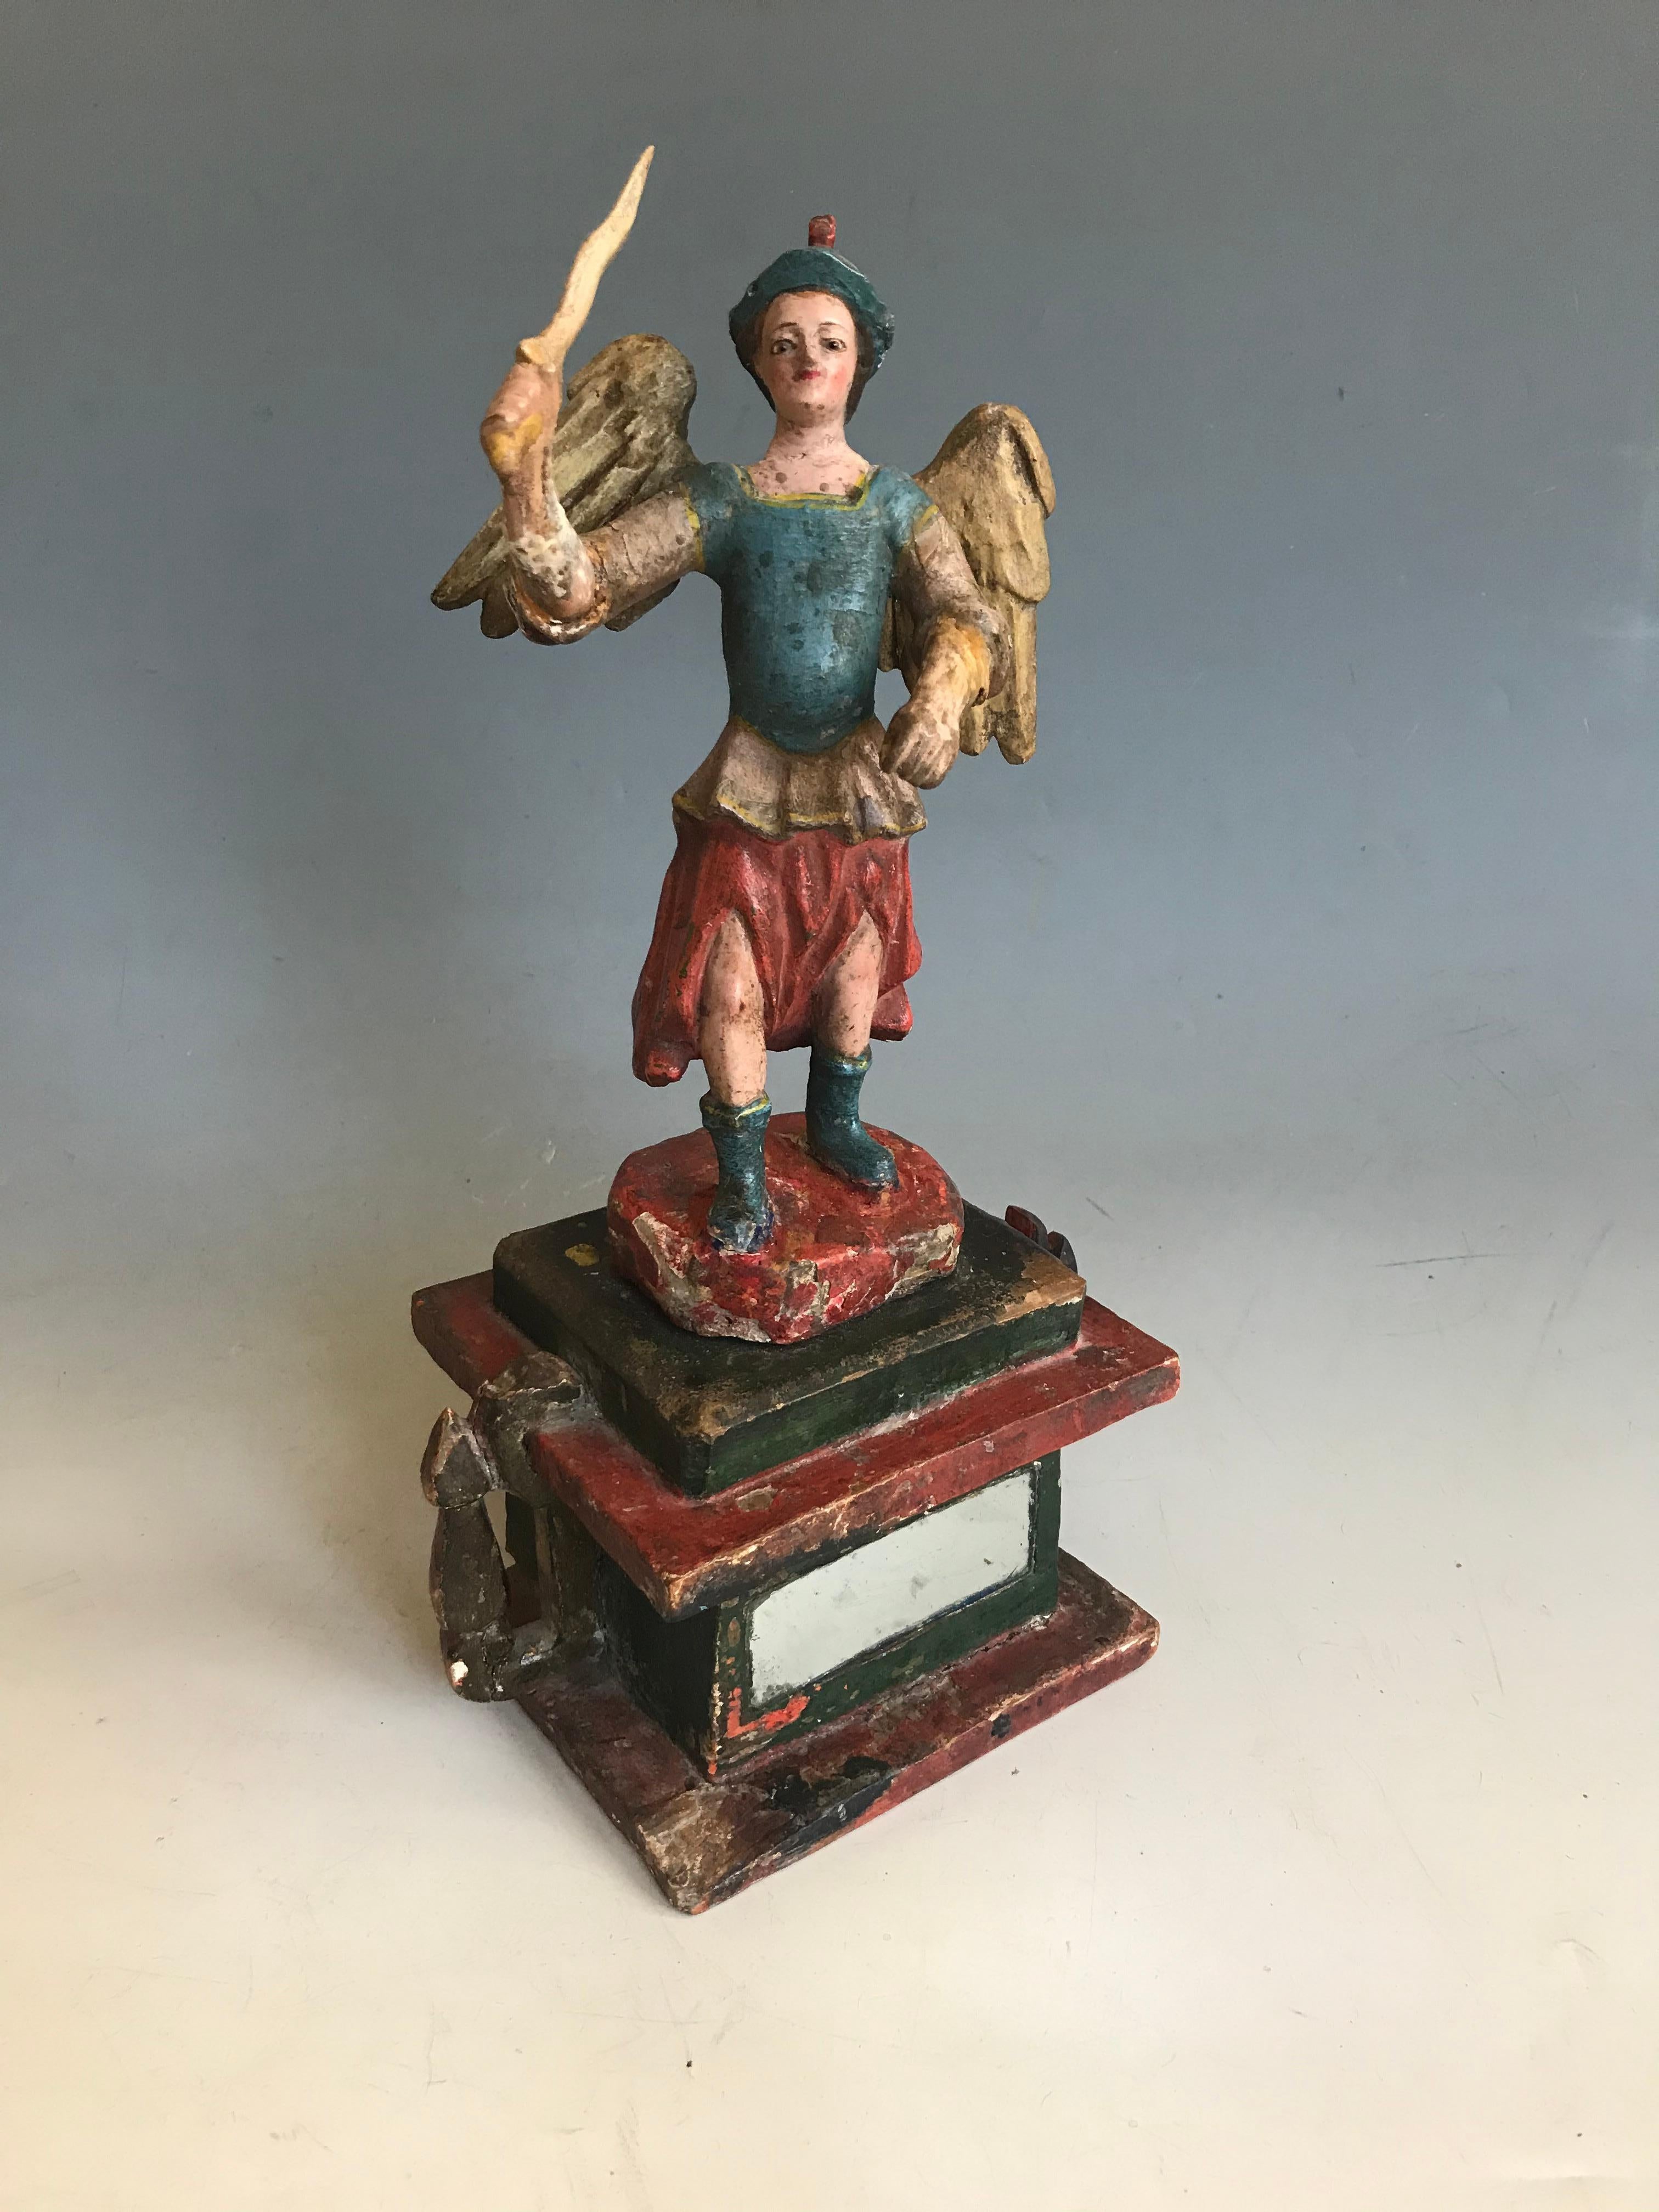  Antique South American Spanish Colonial Poly chrome Folk Art Santos figure of St Michael with sword. The finely modeled winged figure standing with a sword on a box type pedestal base with mirrored front, painted in red blue and cream, the face